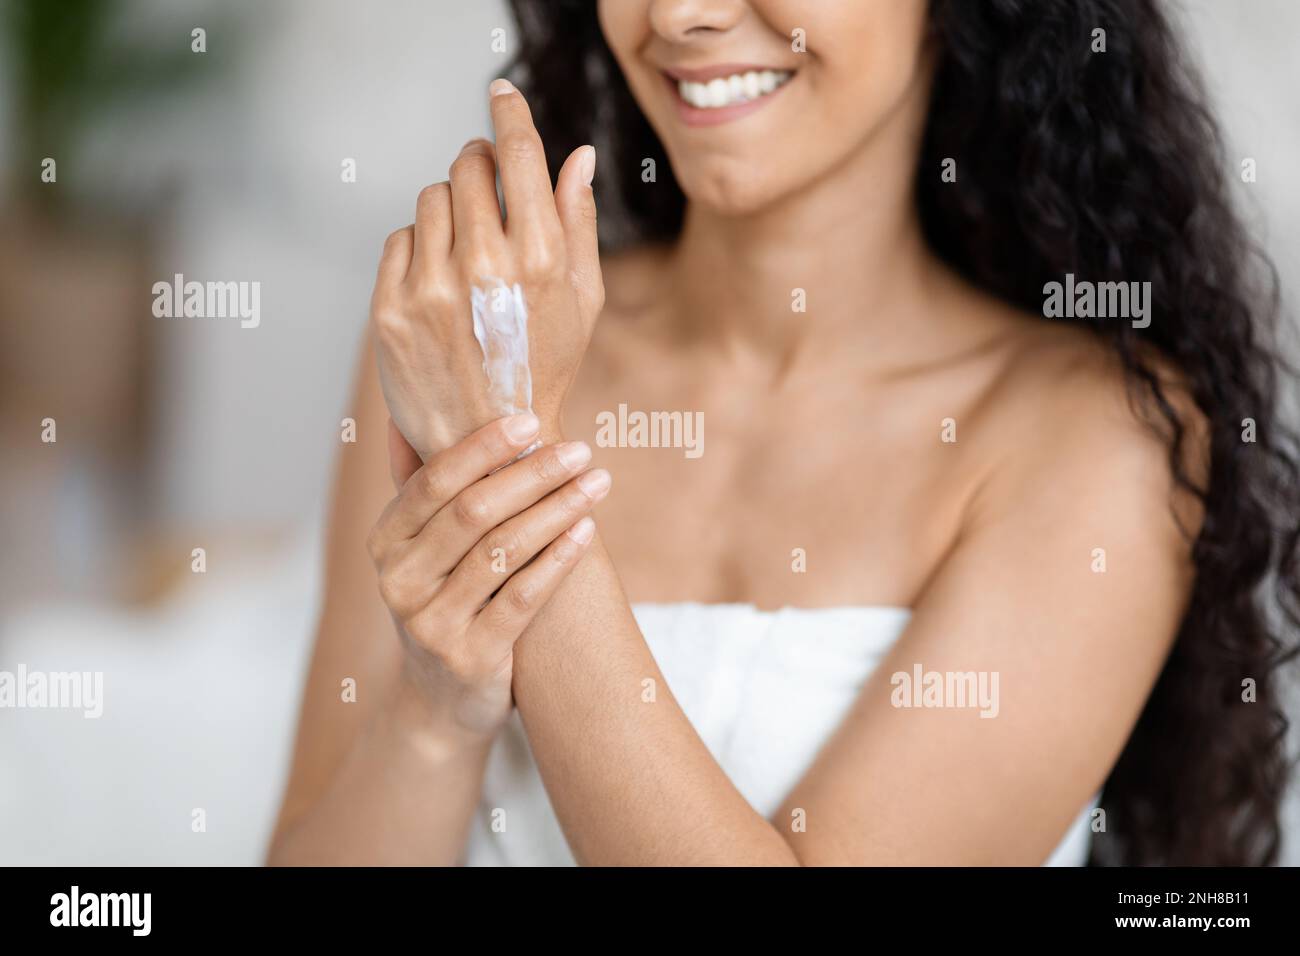 Glad millennial caucasian brunette lady with long hair in towel applies cream on hands Stock Photo